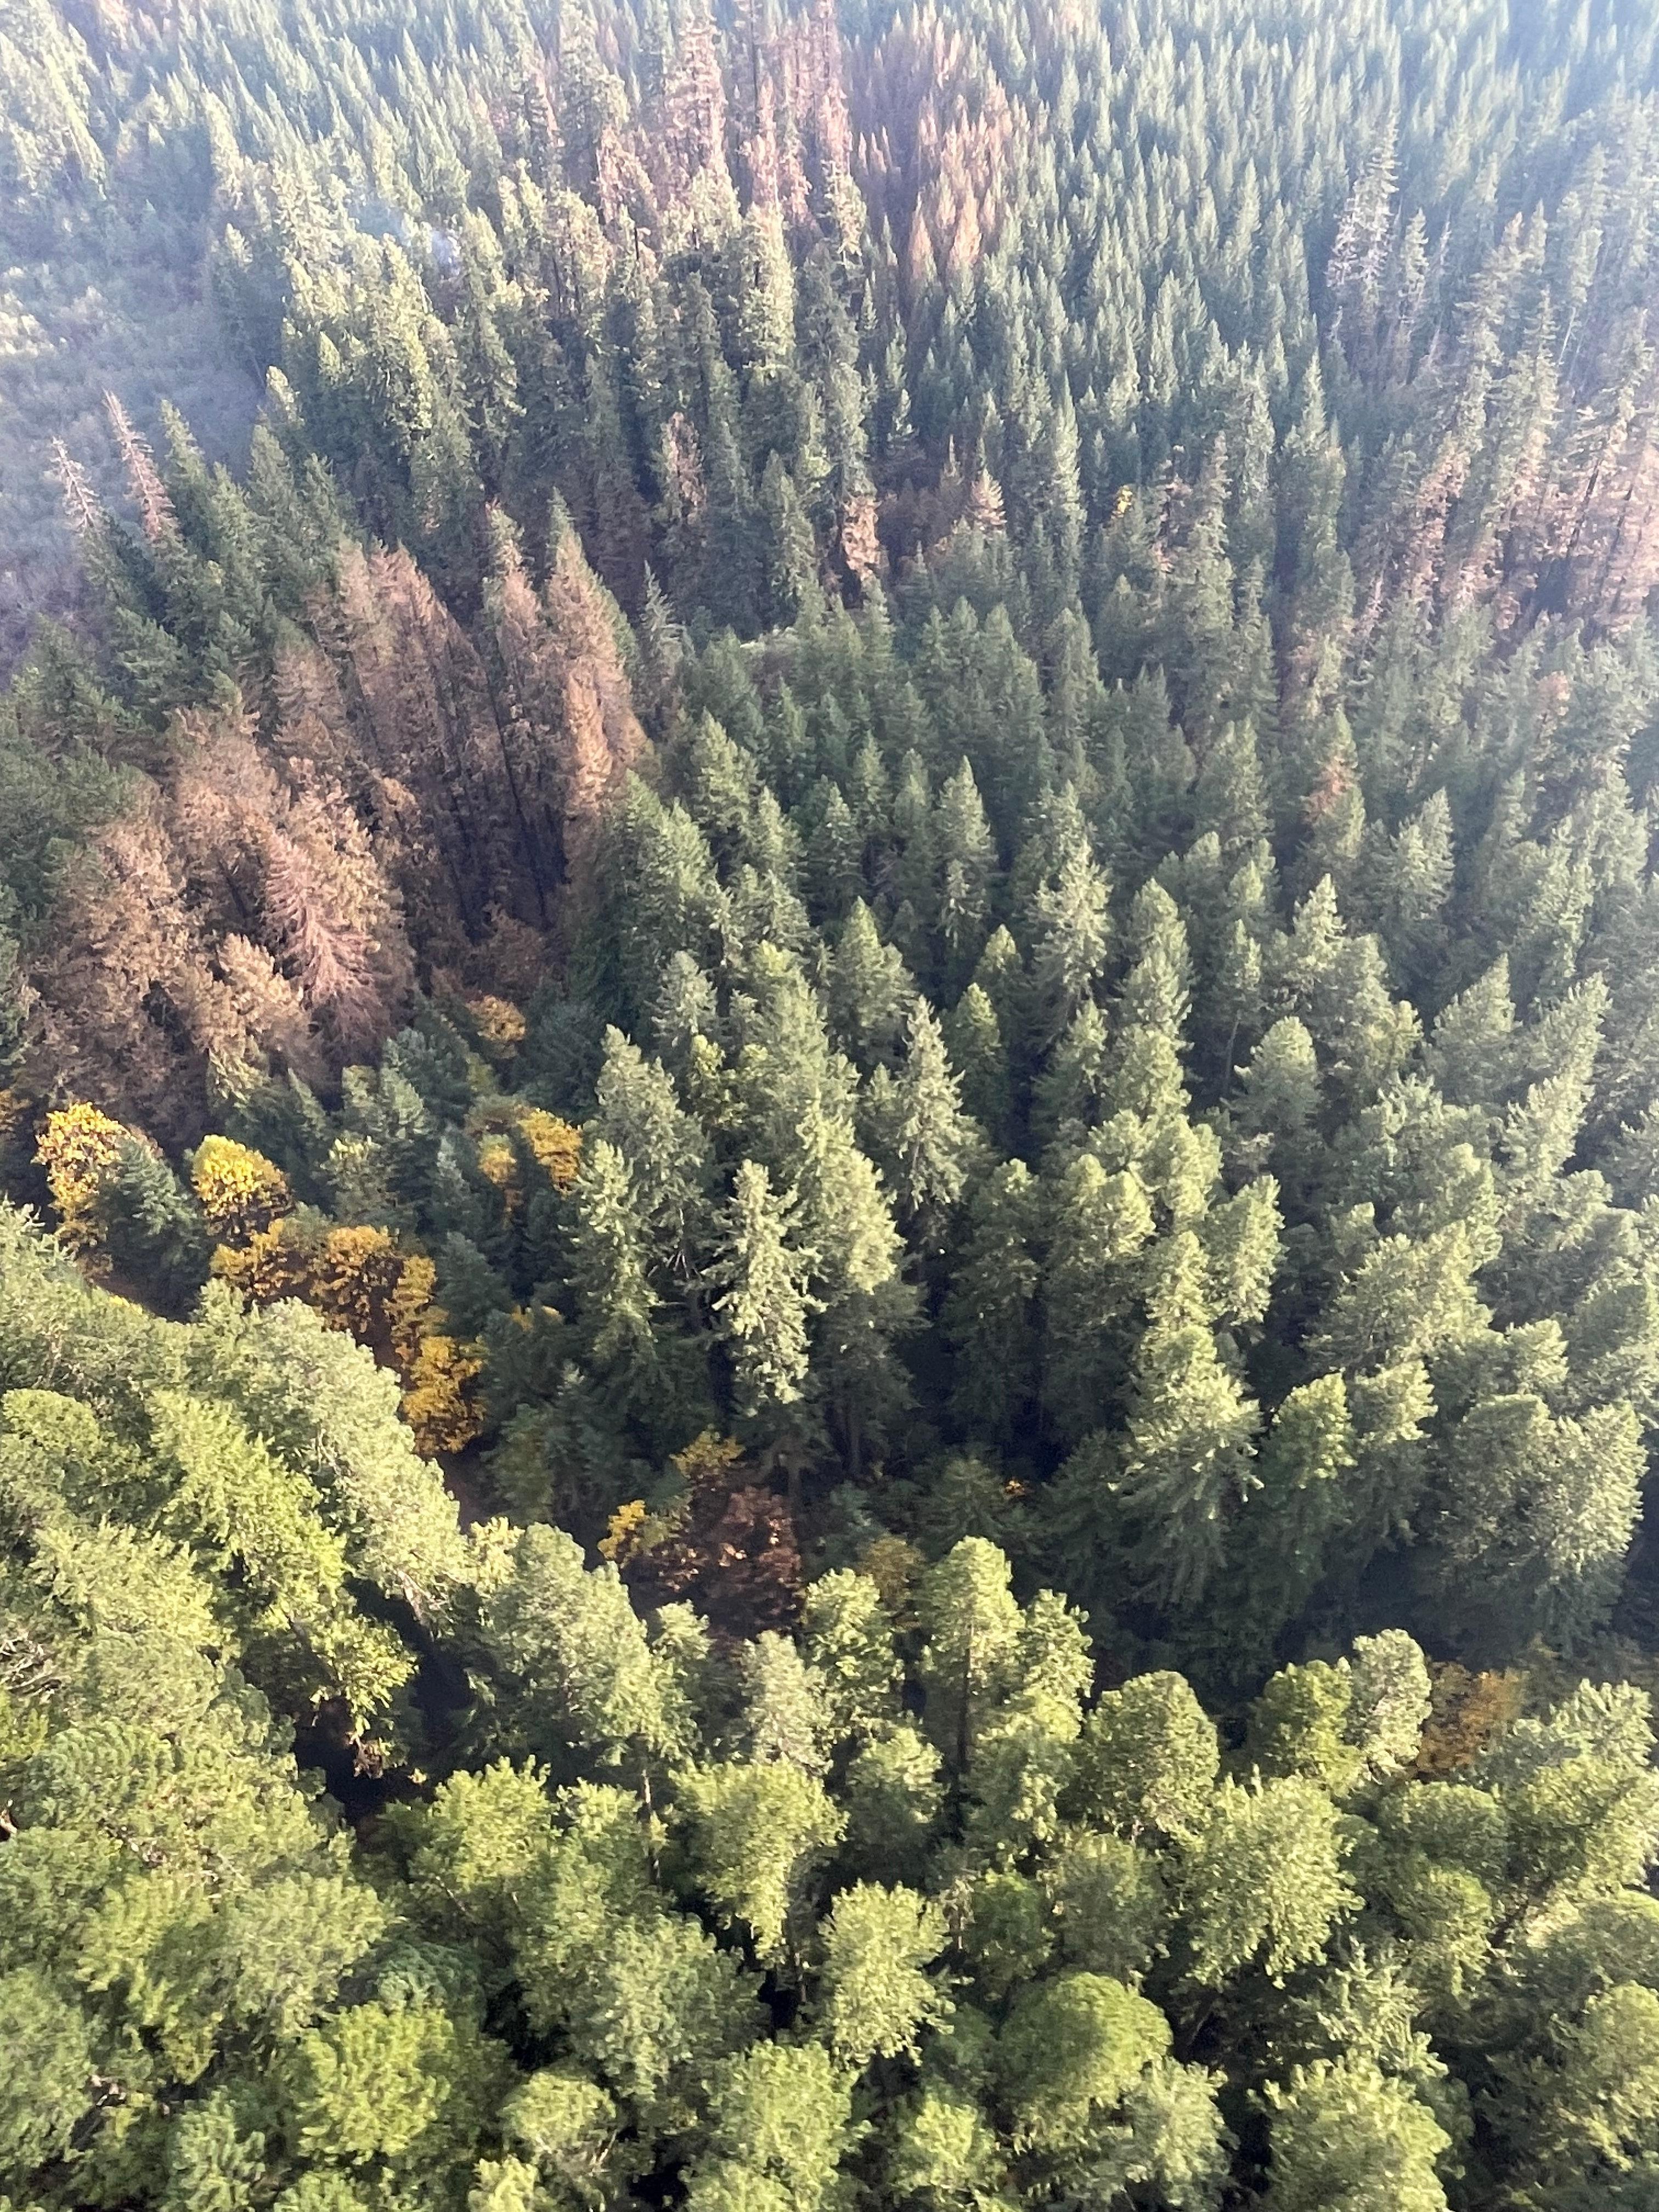 Aerial view of forested area with small patches of burnt trees surrounded by green trees